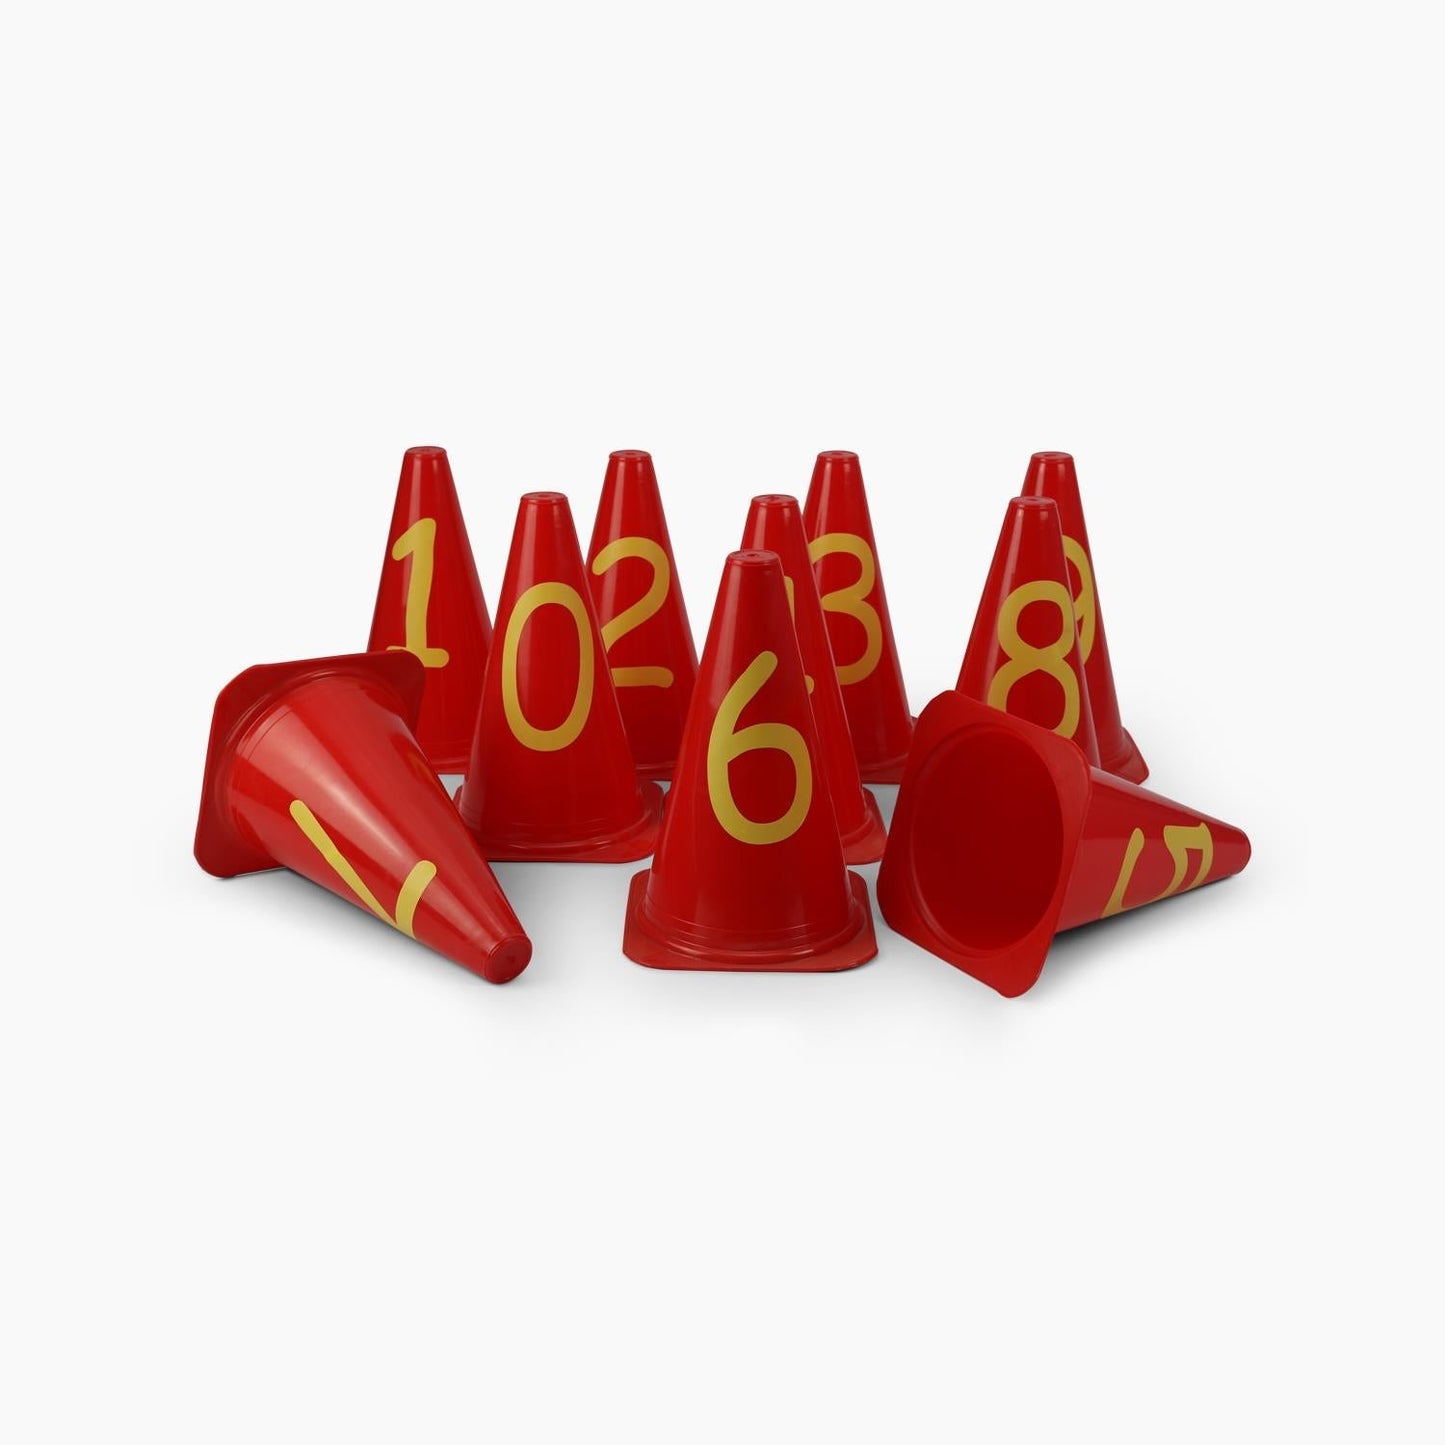 Buy Numbered drilled cones (Set of 10 cones)-Training Cone-Splay (UK) Limited-Red-9 Inch-Splay UK Online